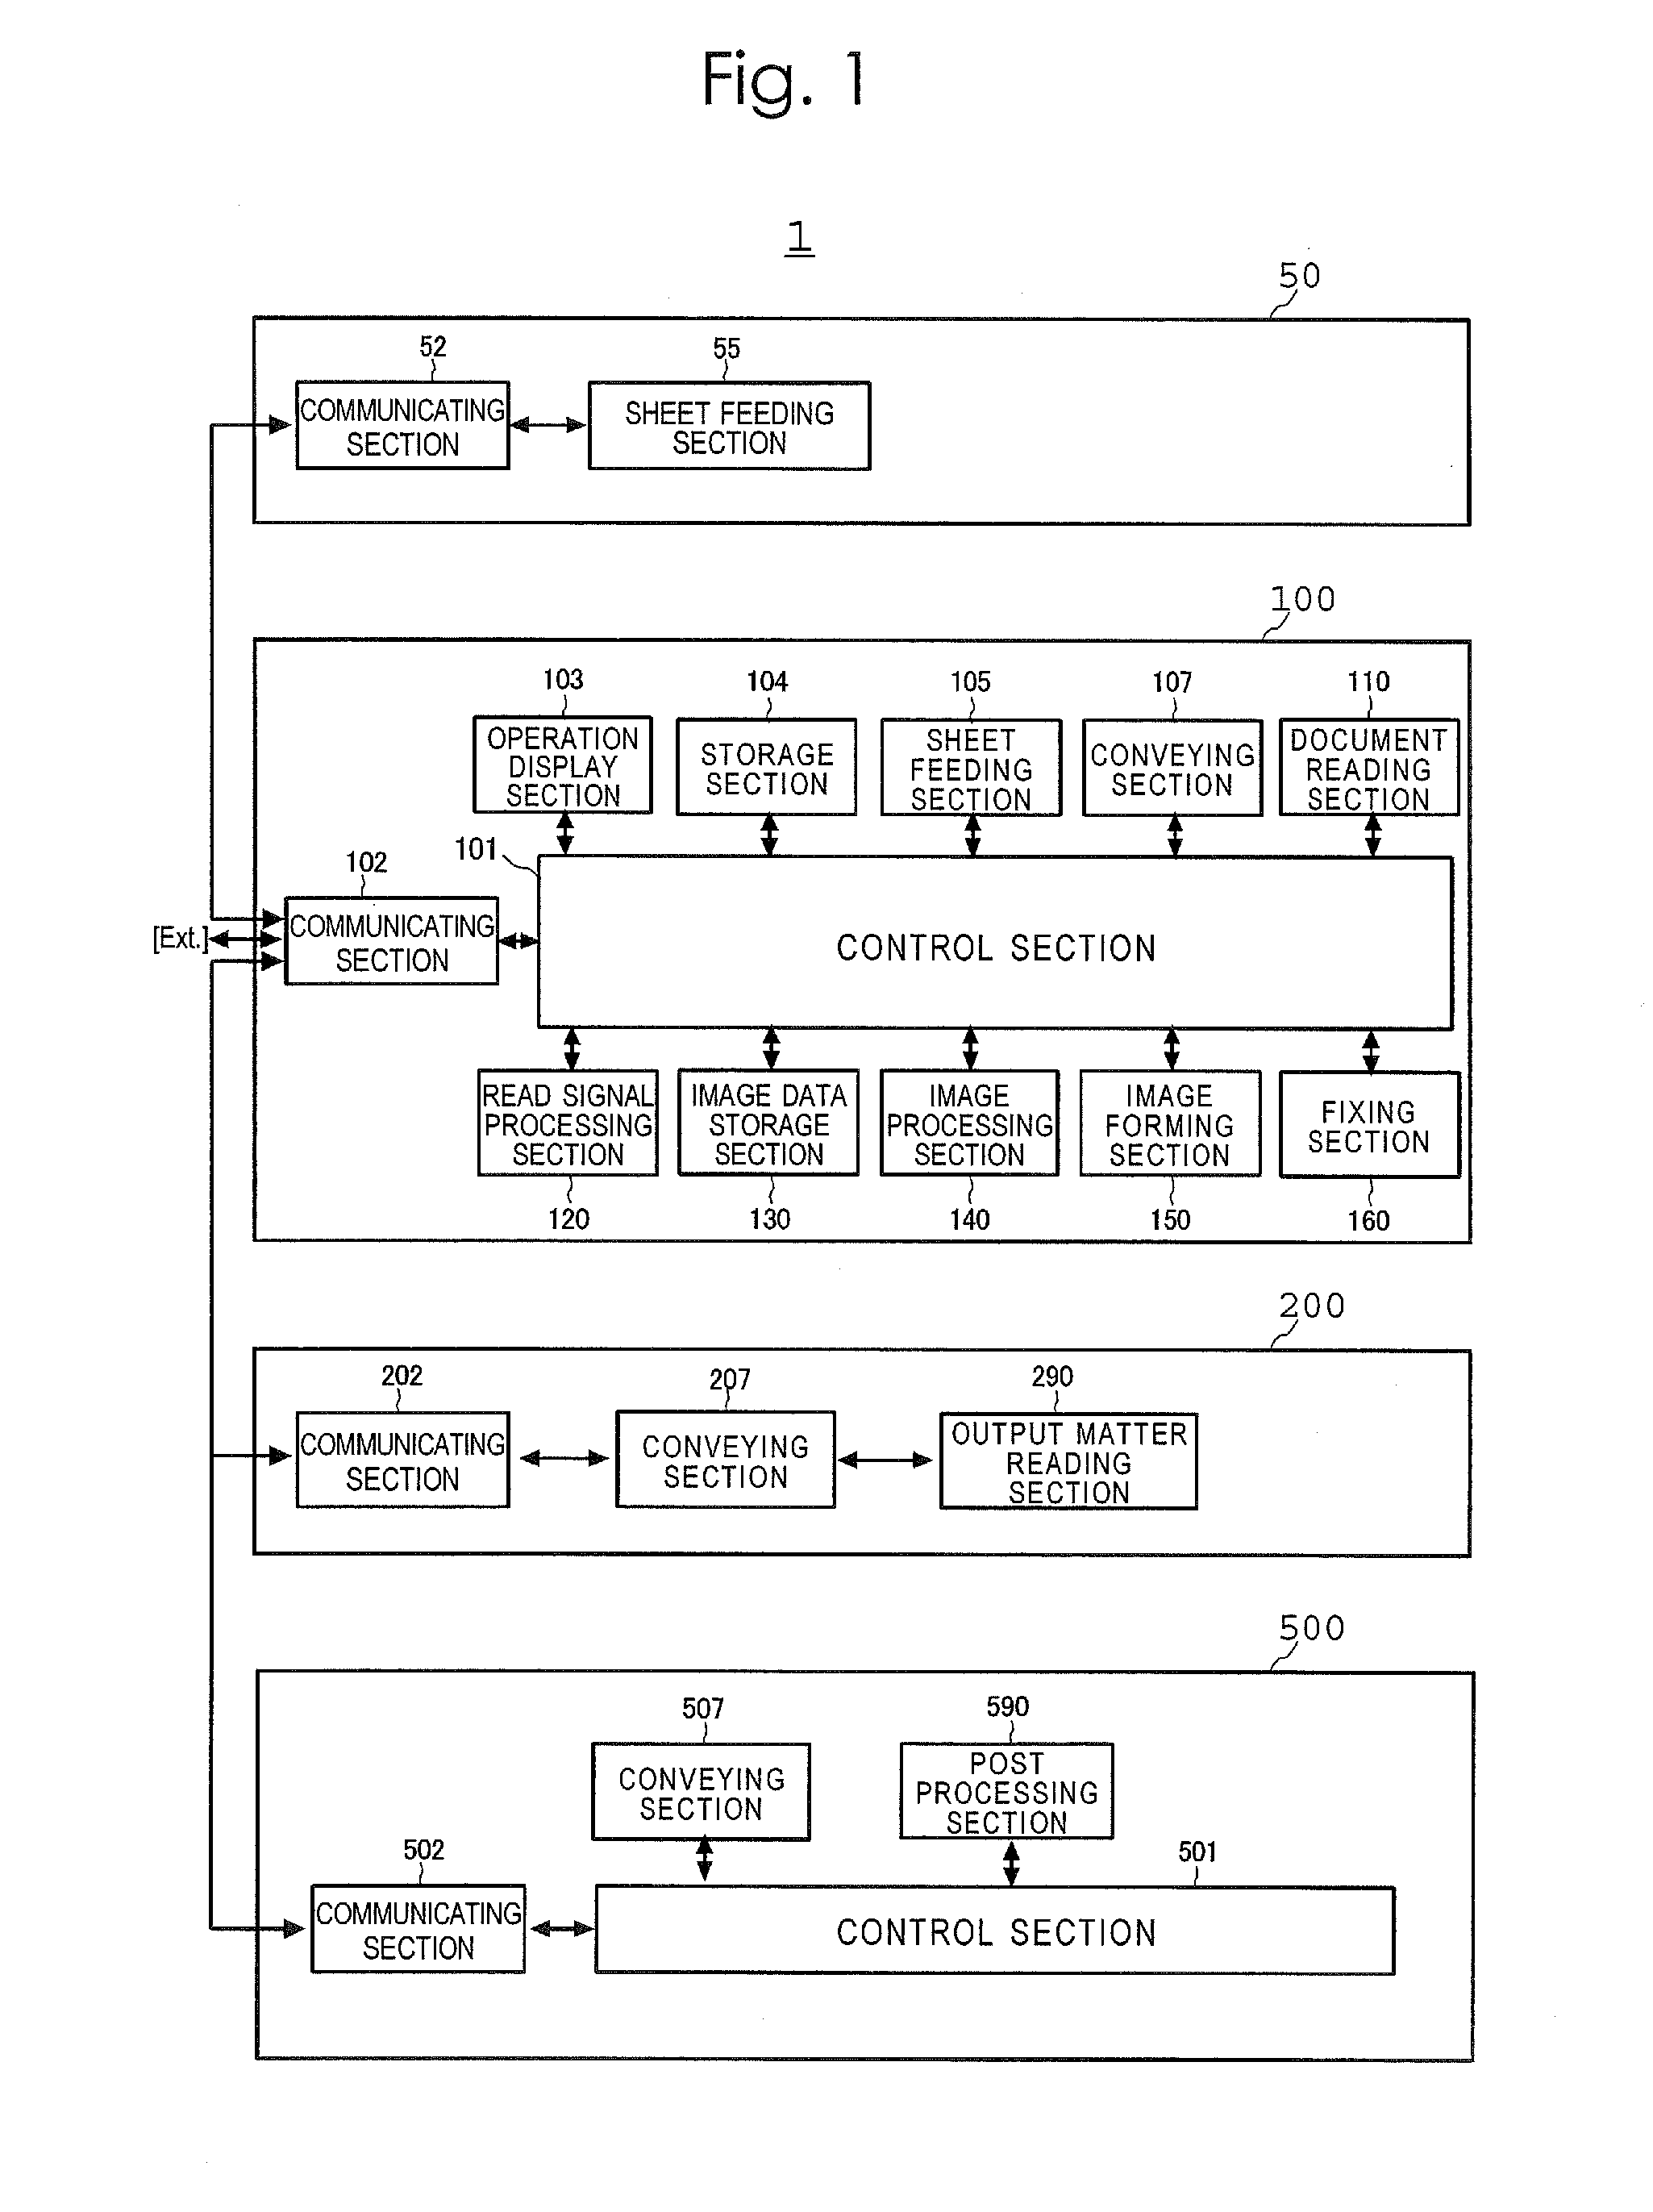 Image forming apparatus, image forming system, and image formation control method